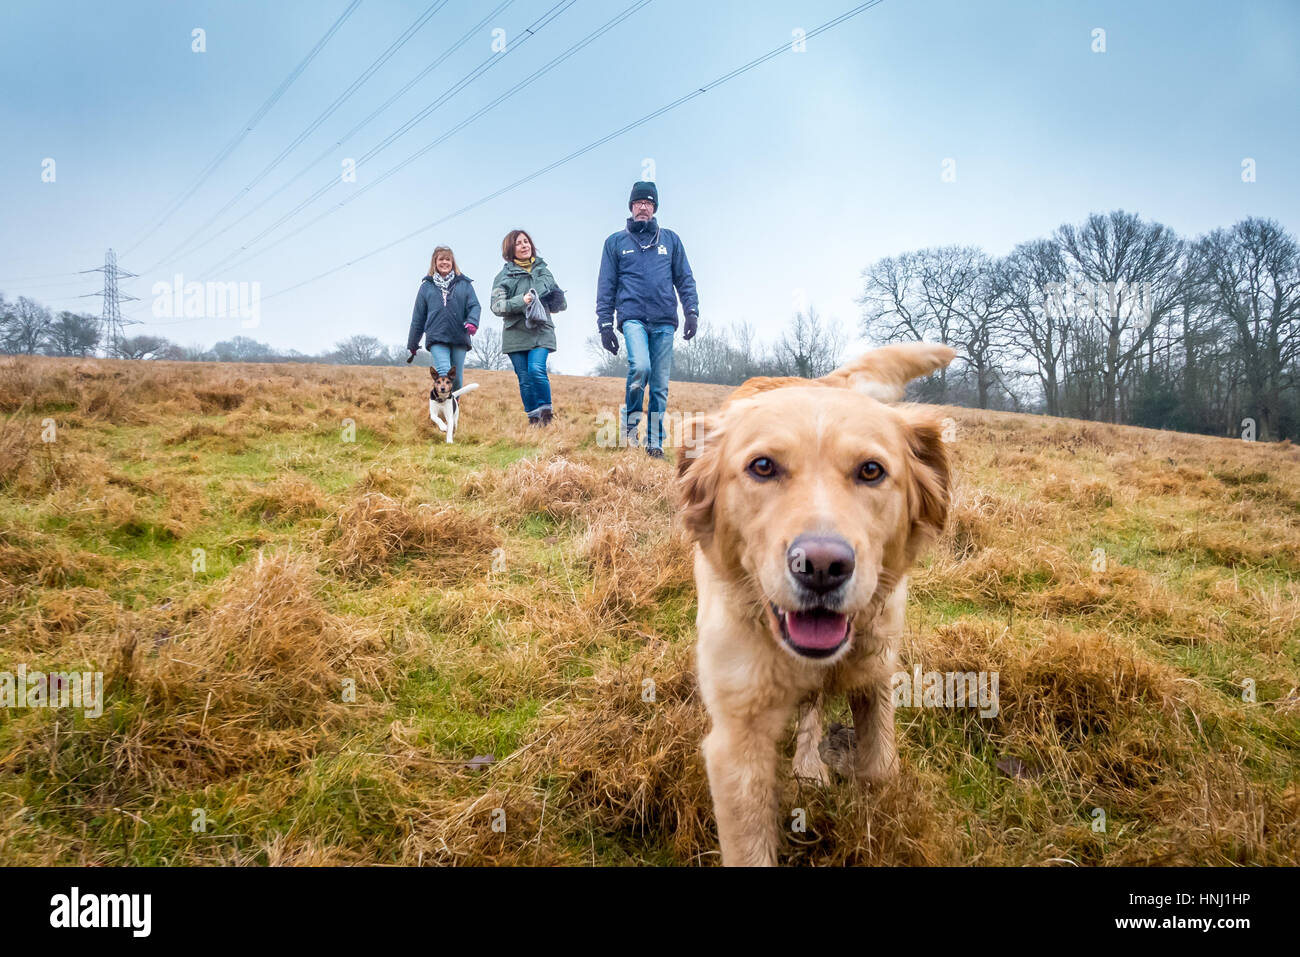 Sunday afternoon dog walking in mid-Sussex. Stock Photo